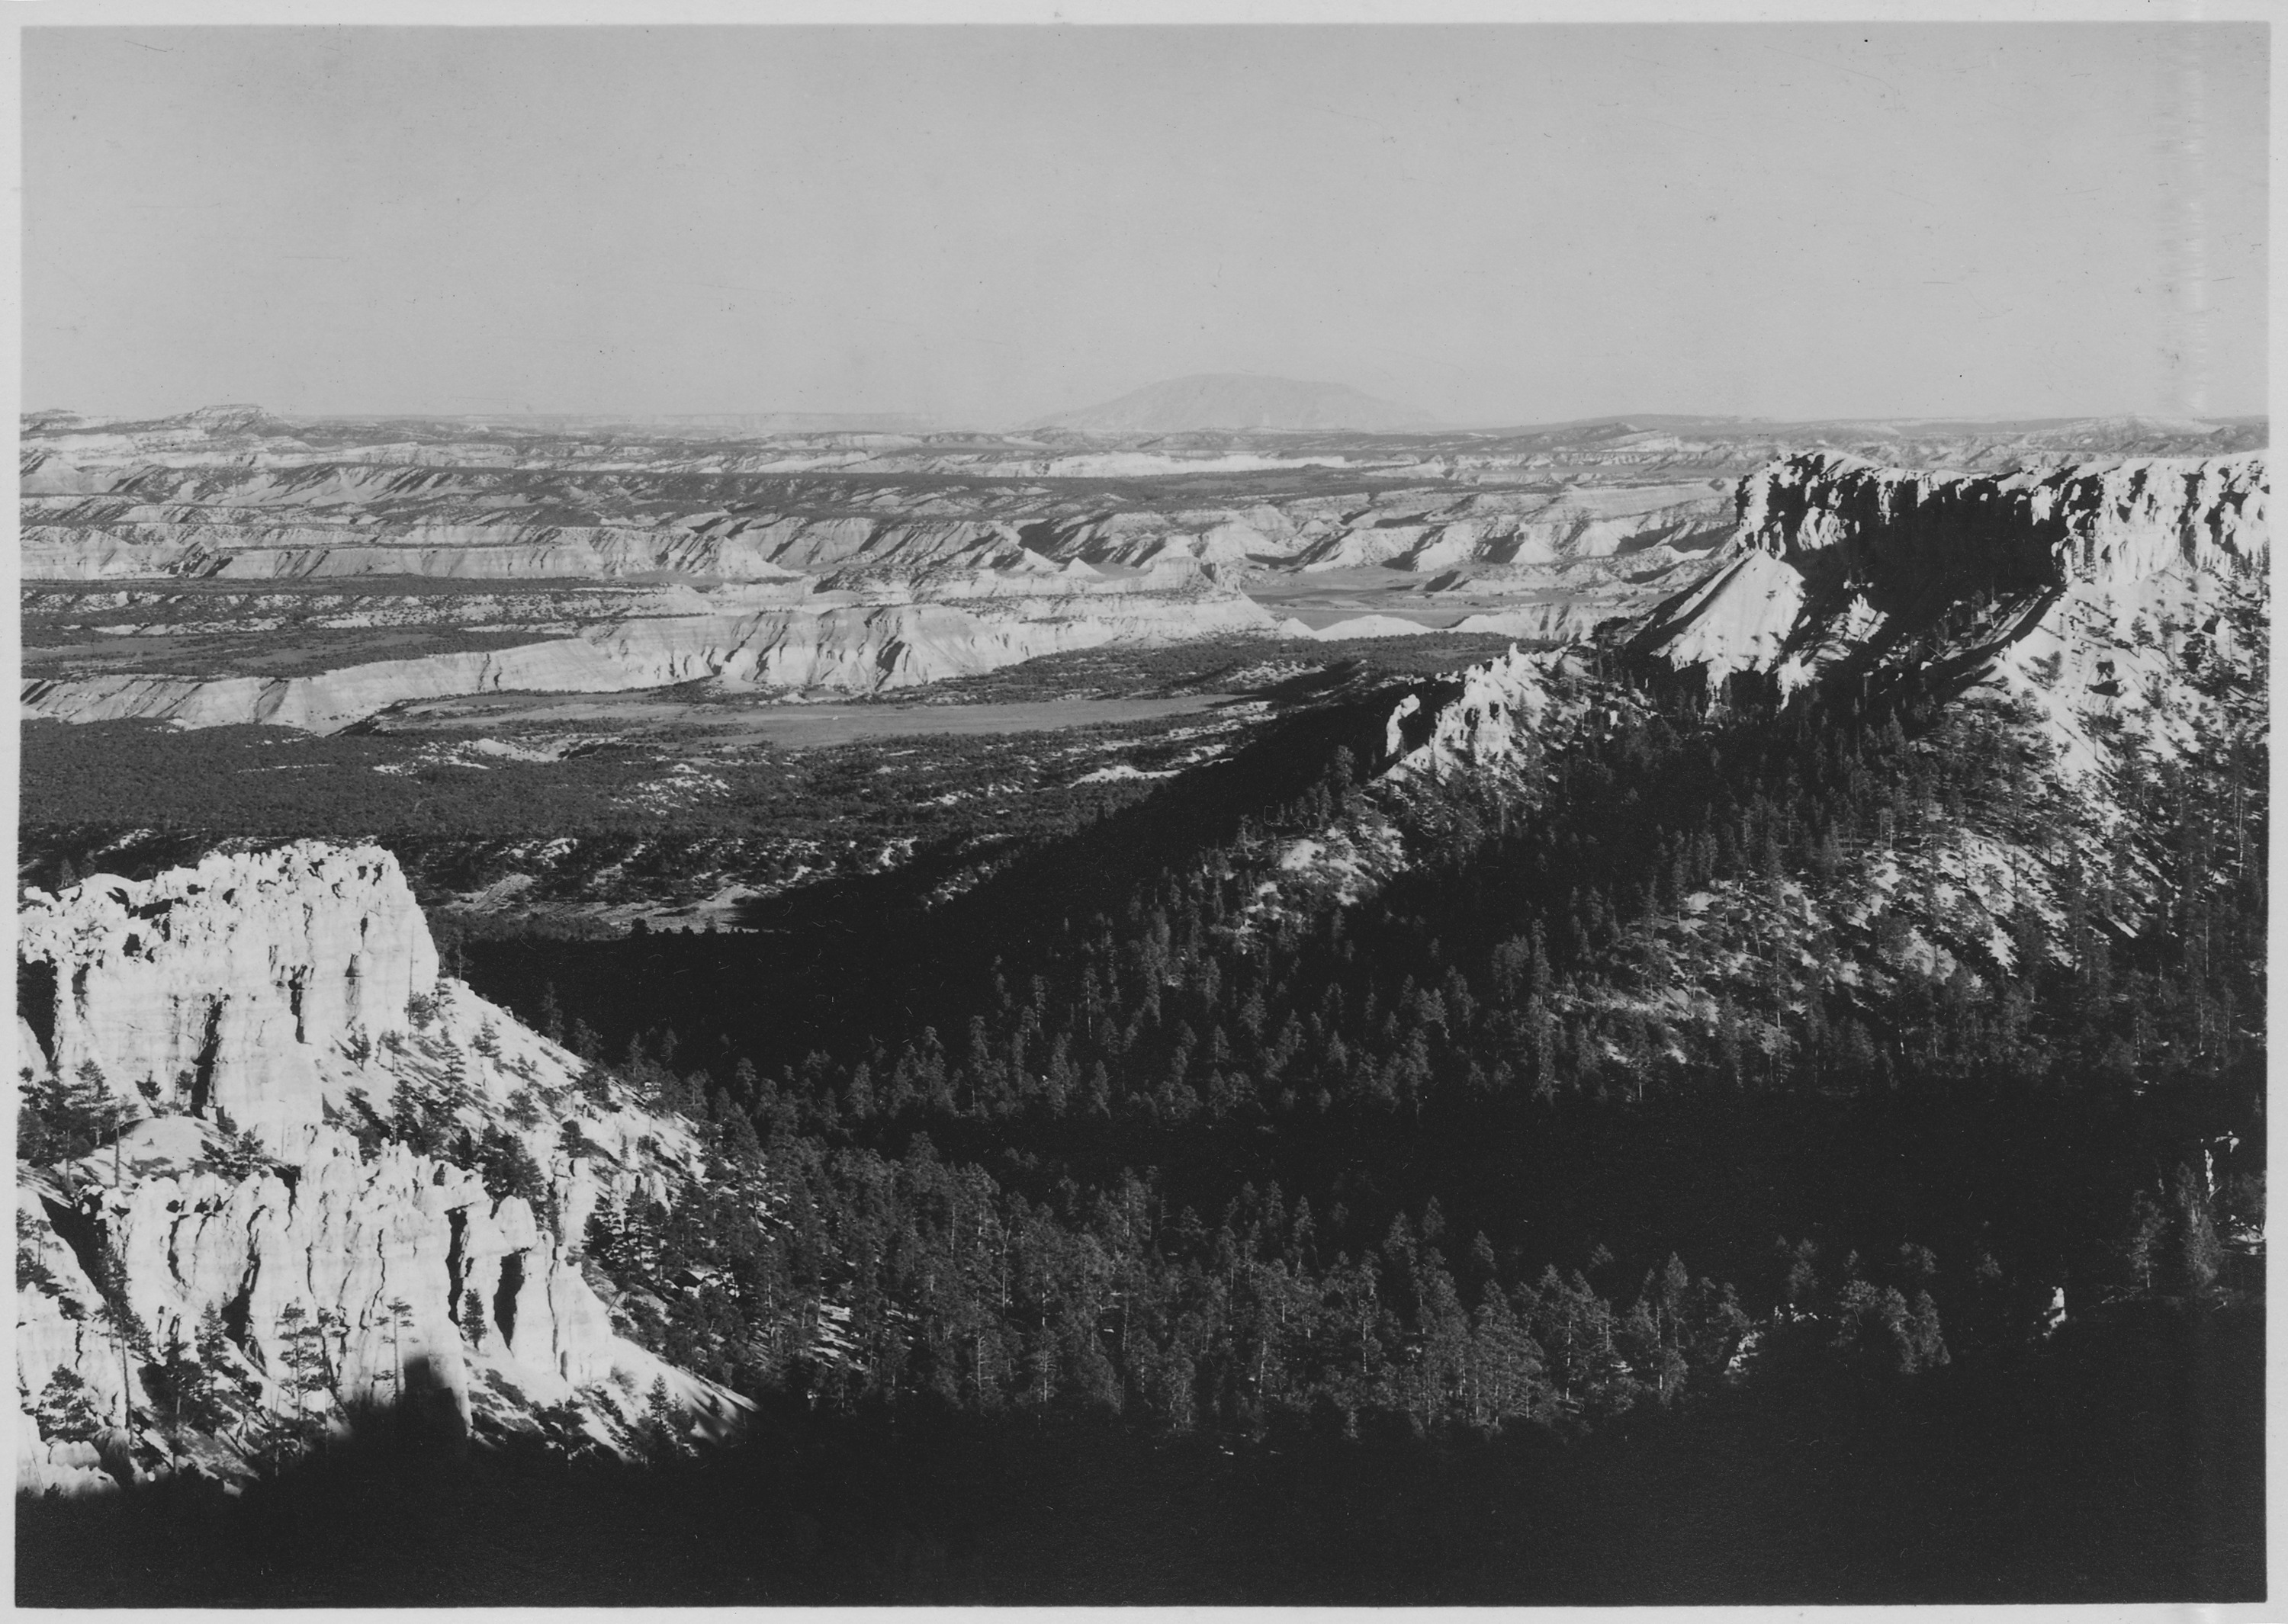 View east from rim in fromt of Bryce Canyon Lodge to the bottom of the Canyon, over the valley of the Pahreah River... - NARA - 520229